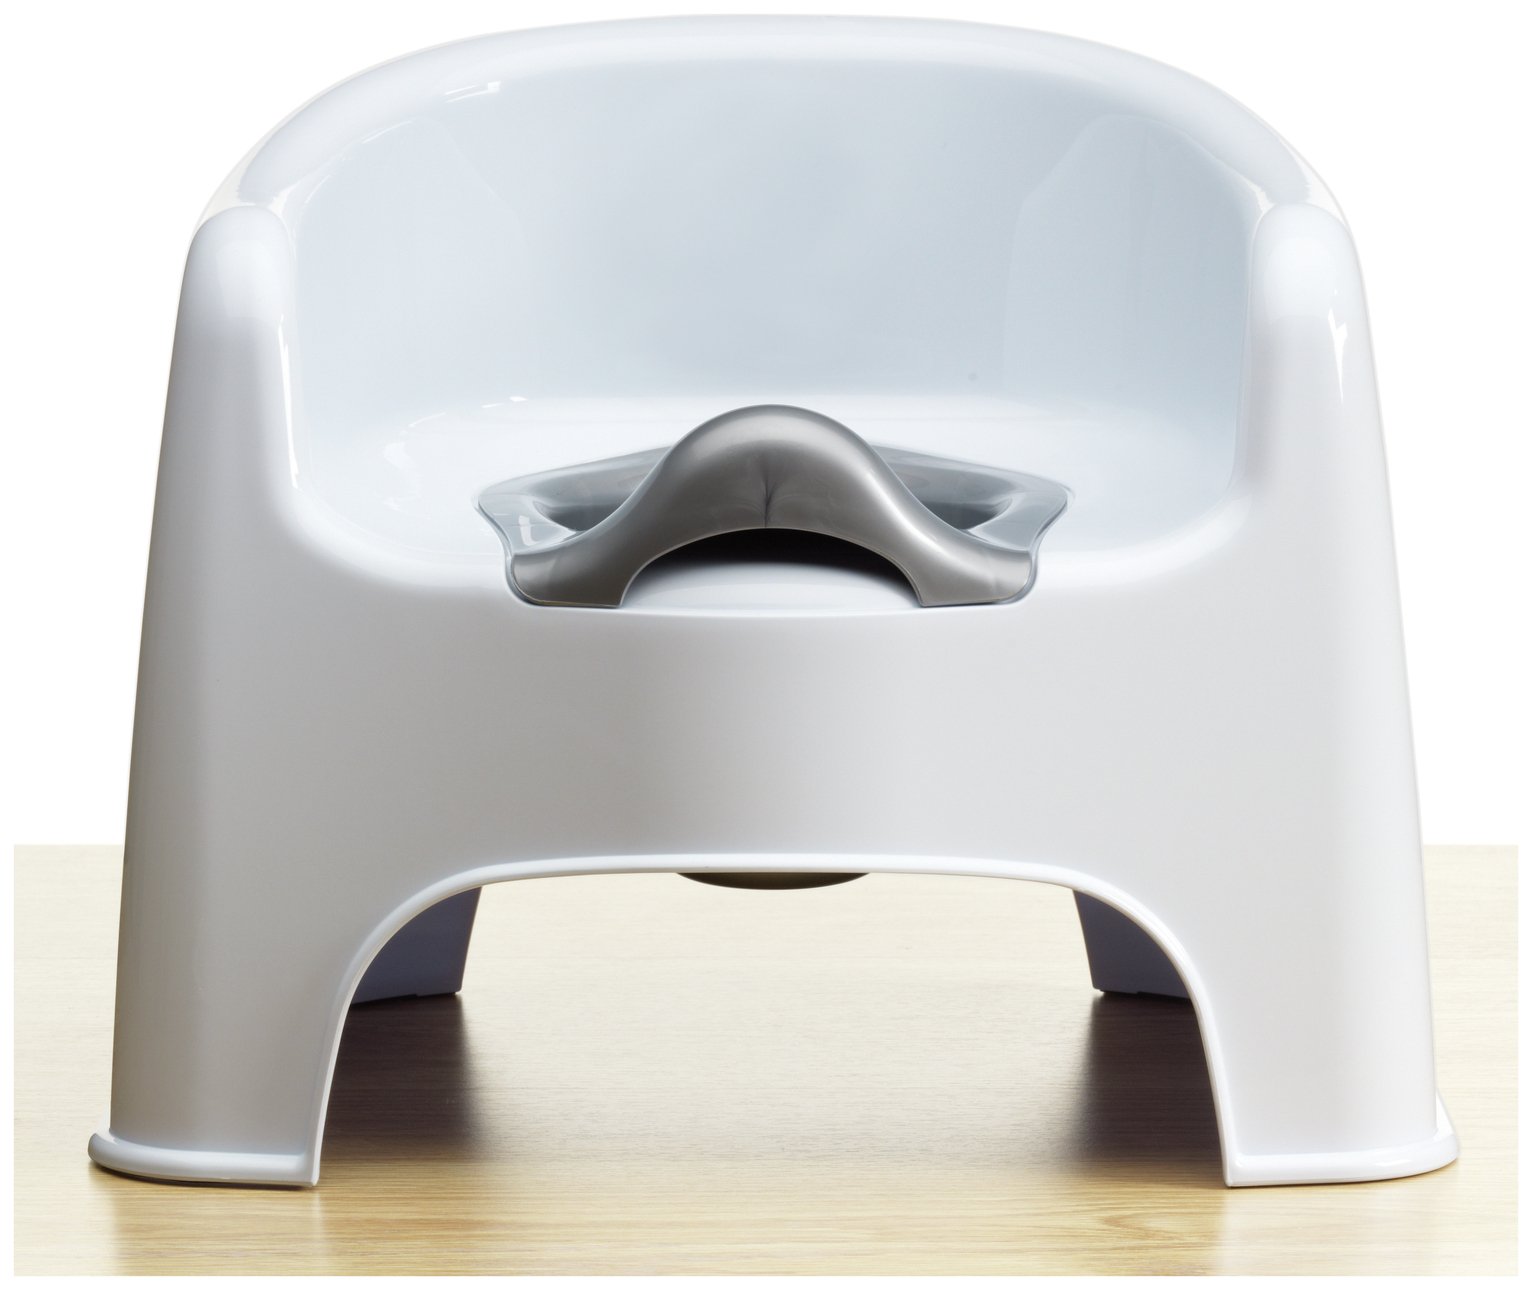 Strata Little Star Potty Chair Review